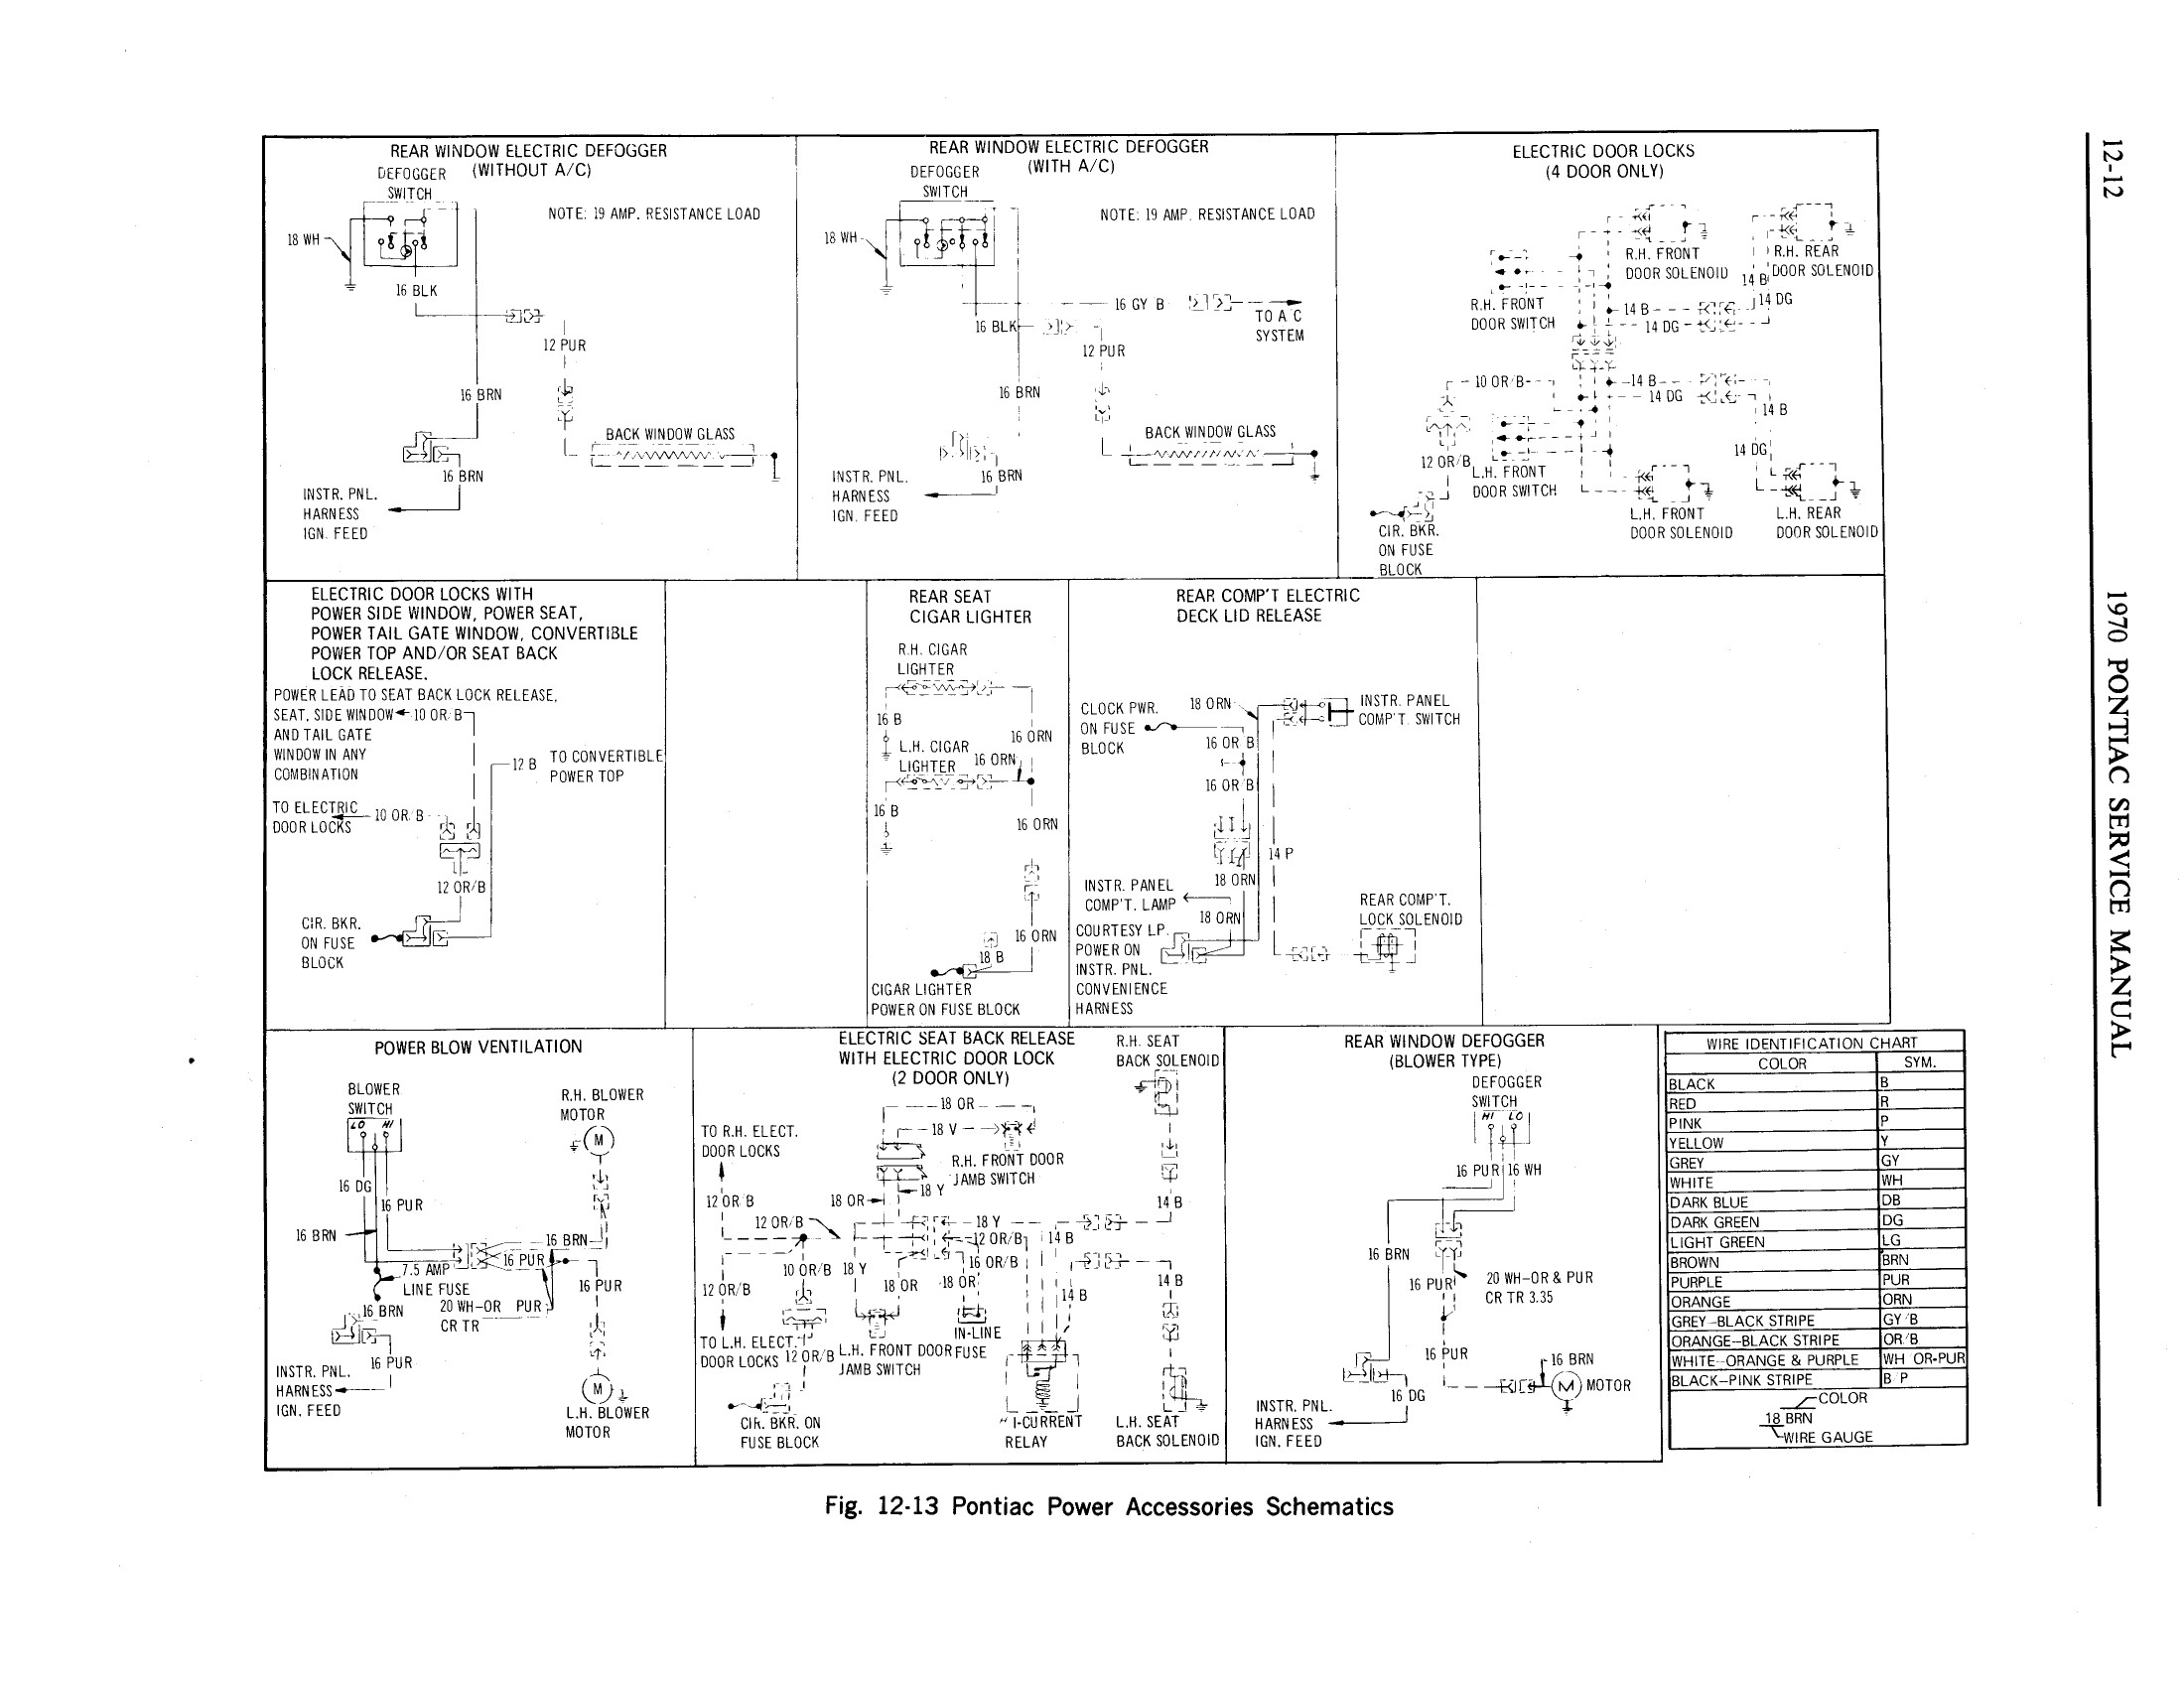 1970 Pontiac Chassis Service Manual - Chassis Electrical Page 12 of 67